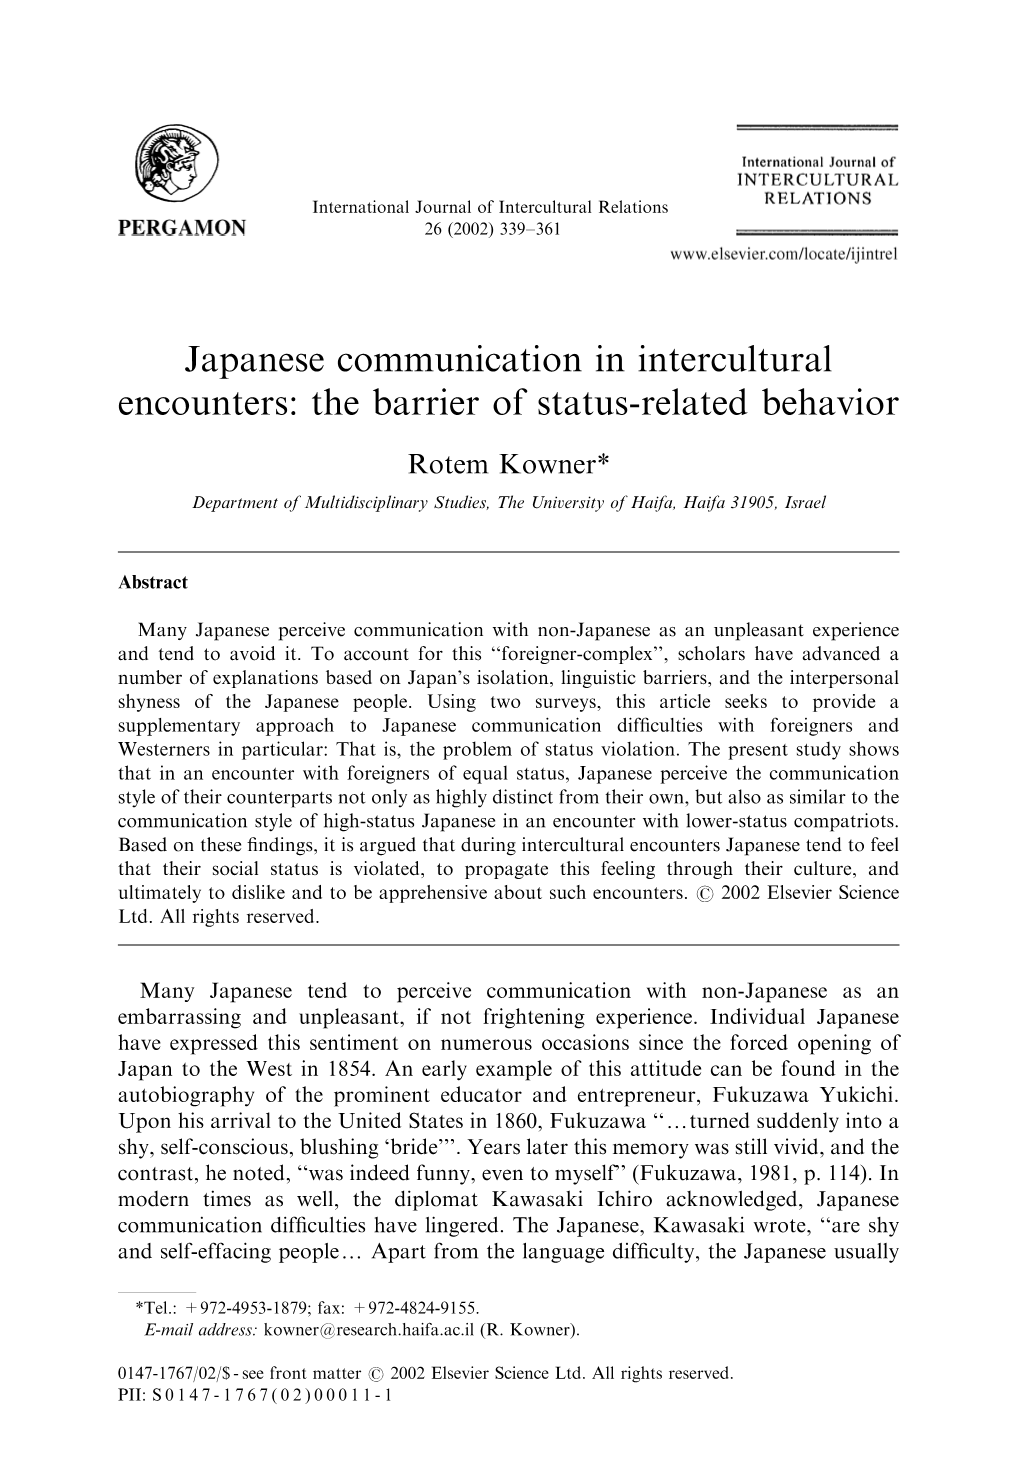 Japanese Communication in Intercultural Encounters: the Barrier of Status-Related Behavior